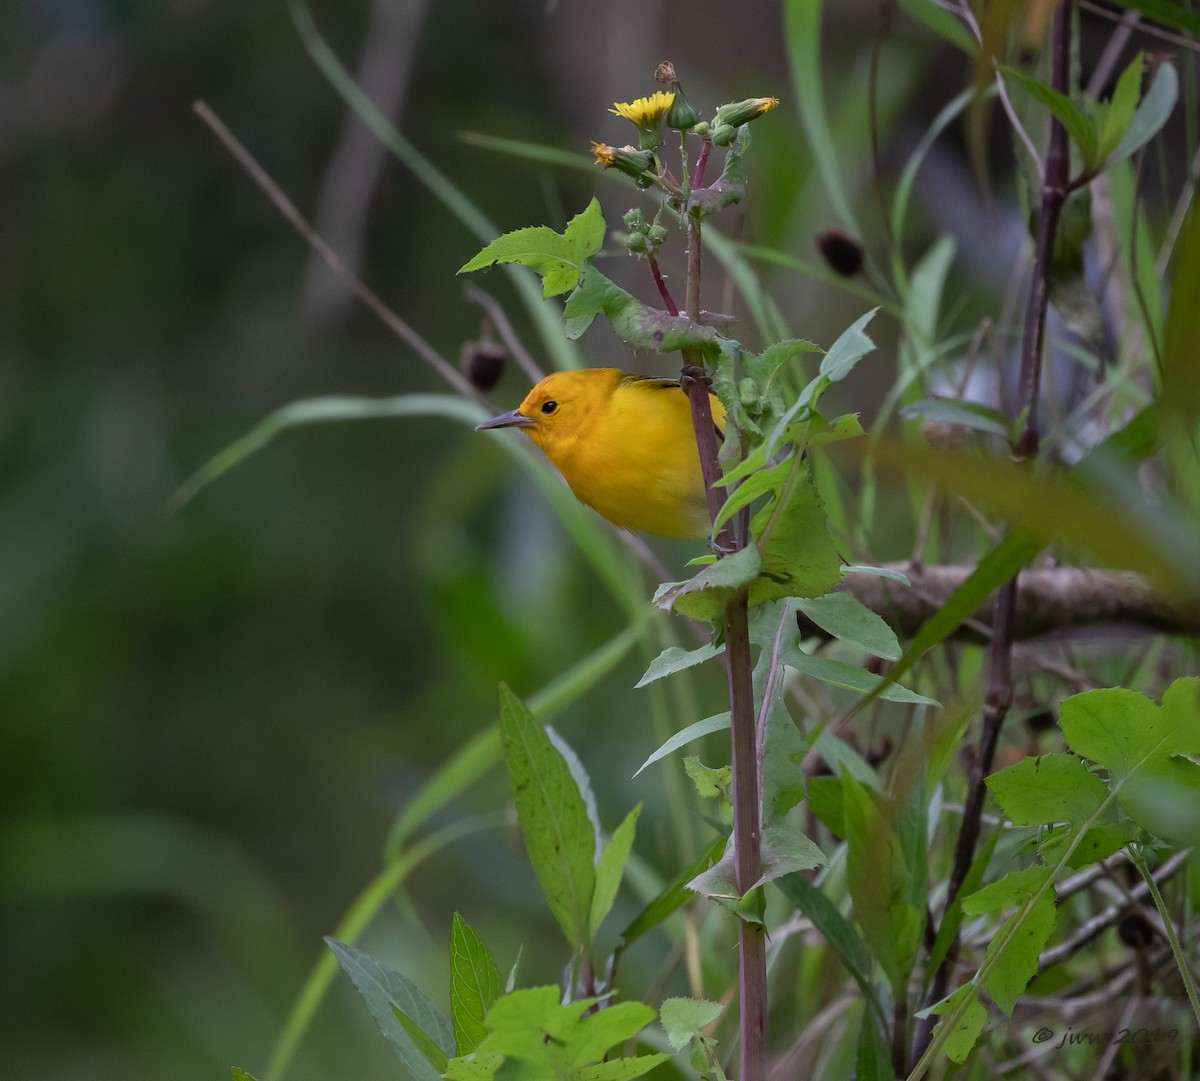 Prothonotary Warbler - Janey Woodley